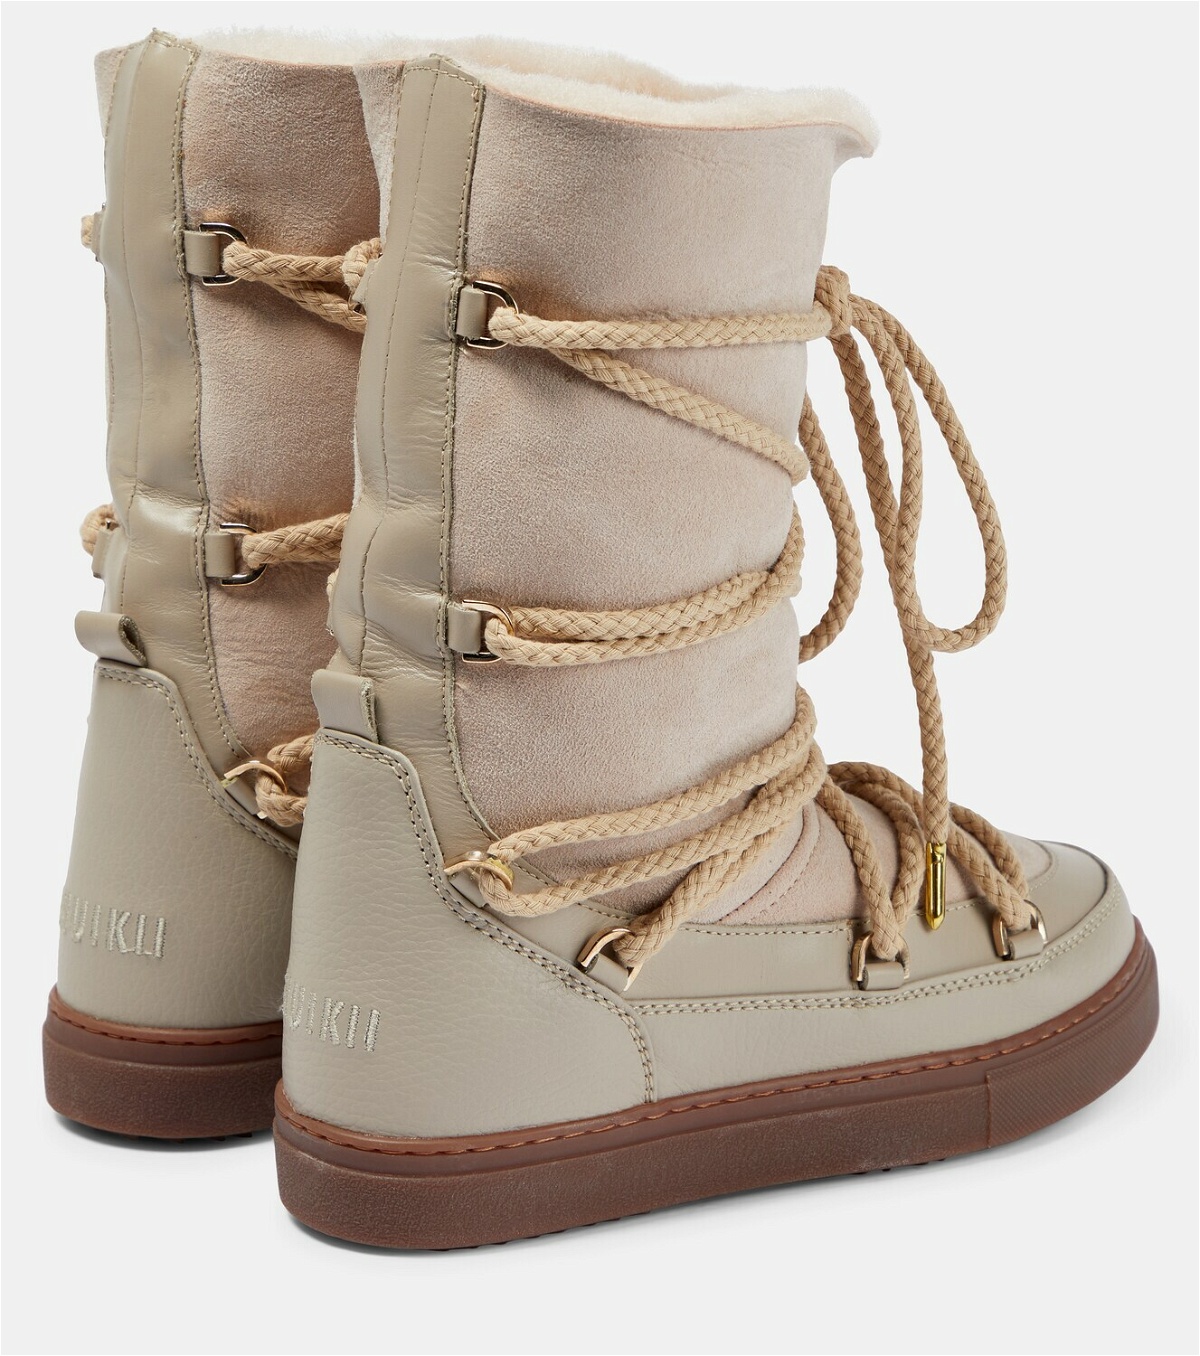 Inuikii Shearling-lined snow boots